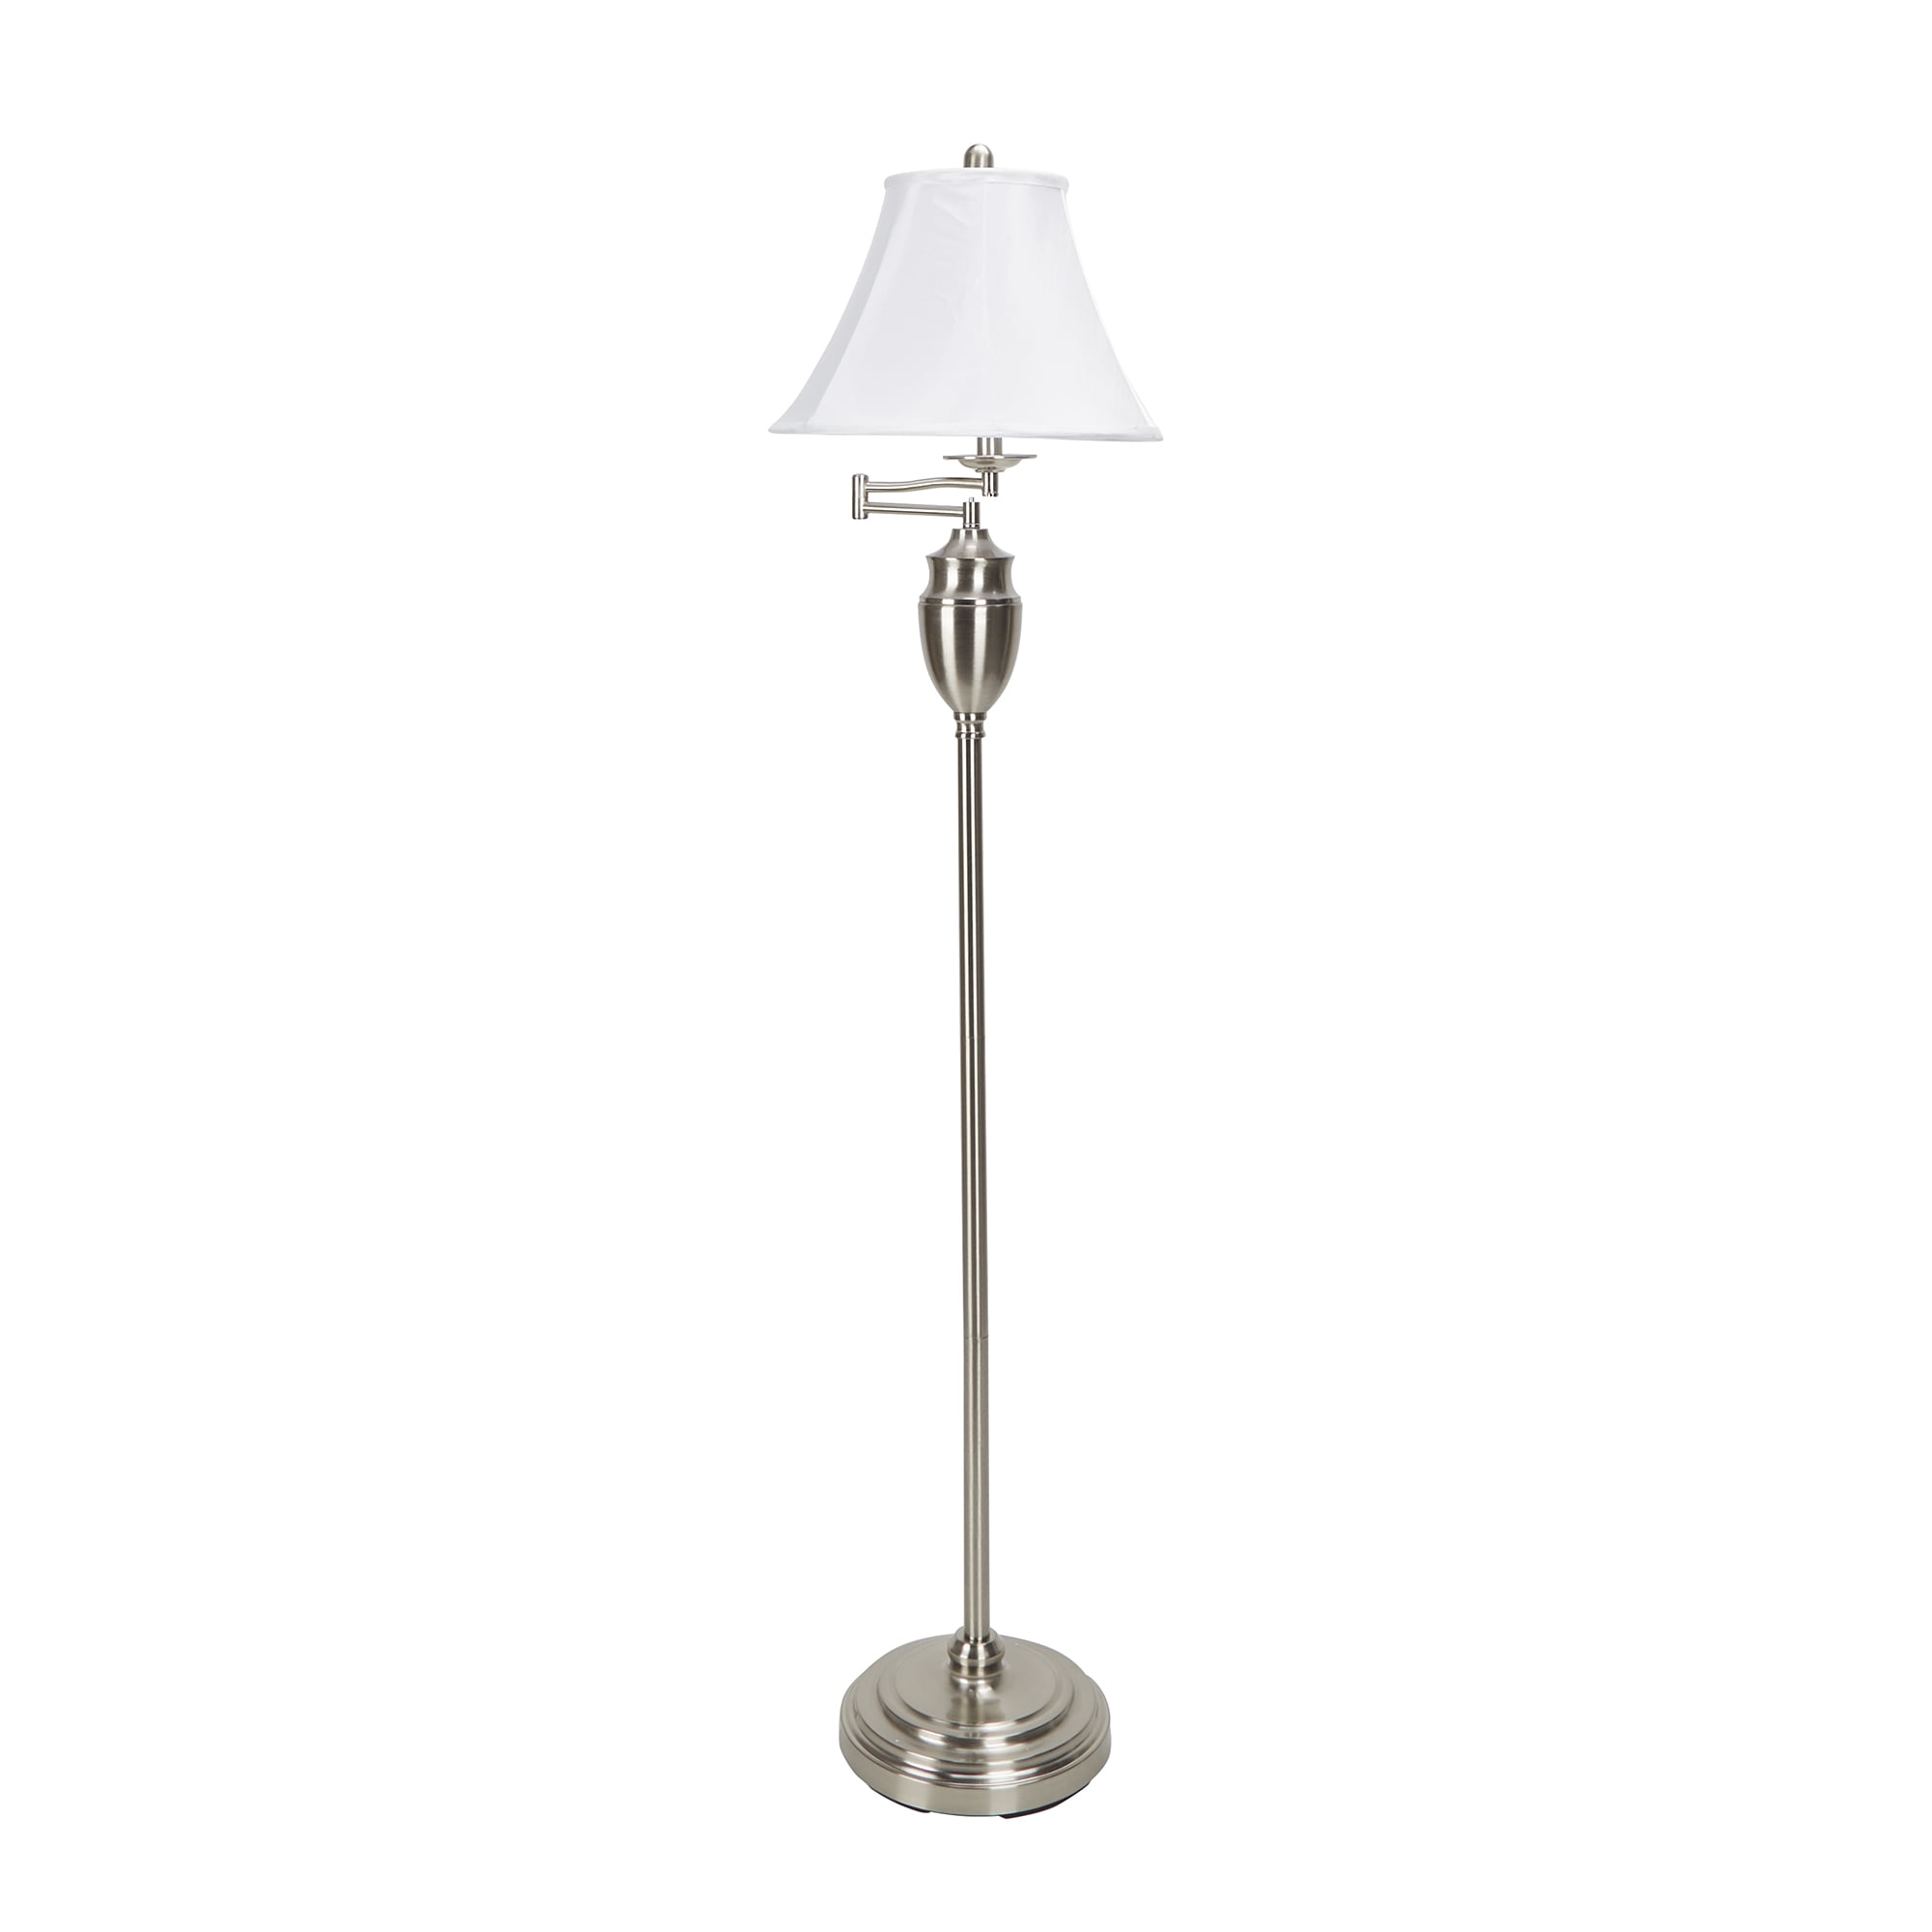 65'' Floor Lamp with Remote Control, for Bedroom/Living  Room/Office,3000k-5500k Standing Light with Linen Lampshade, Timmer( 36W  Bulb Included)